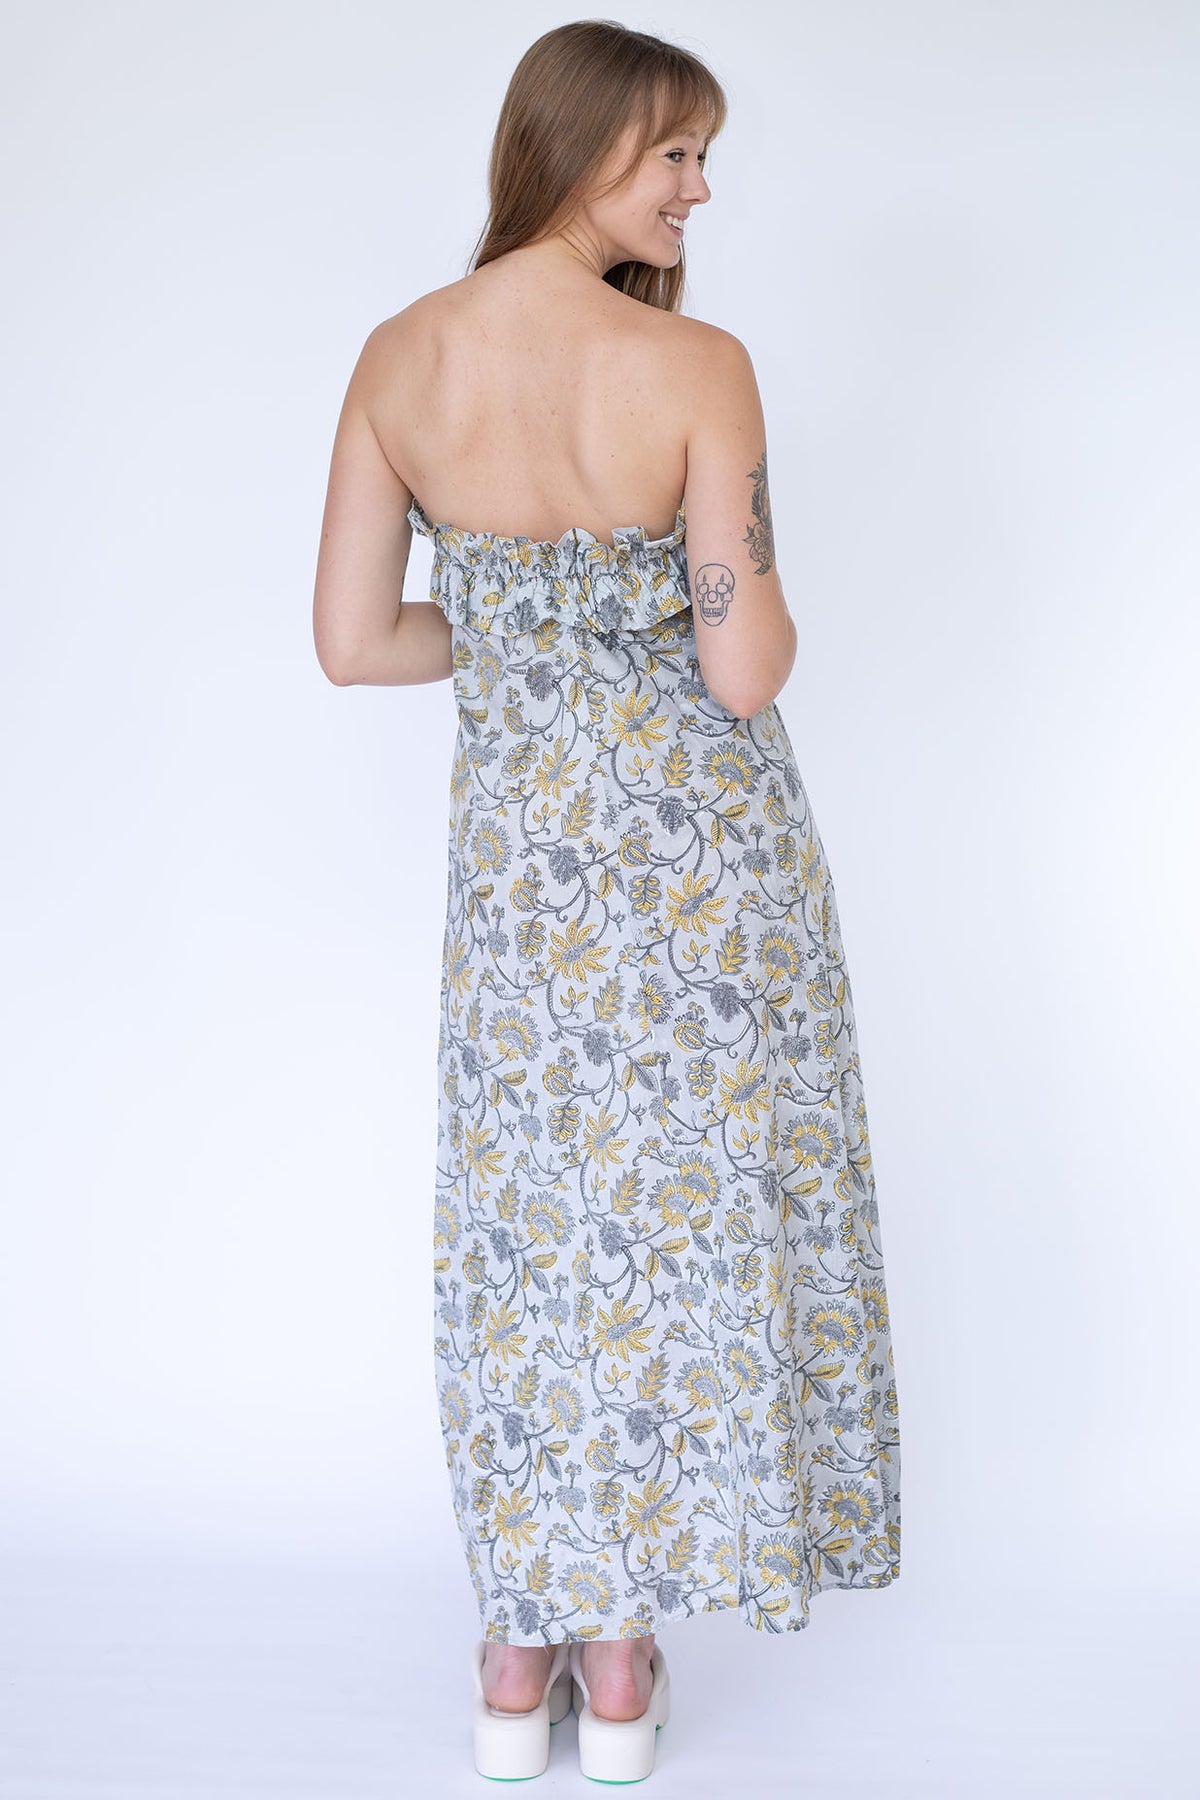 STARKx Summer 2023 Let's Party Dress Yellow Grey Print Back